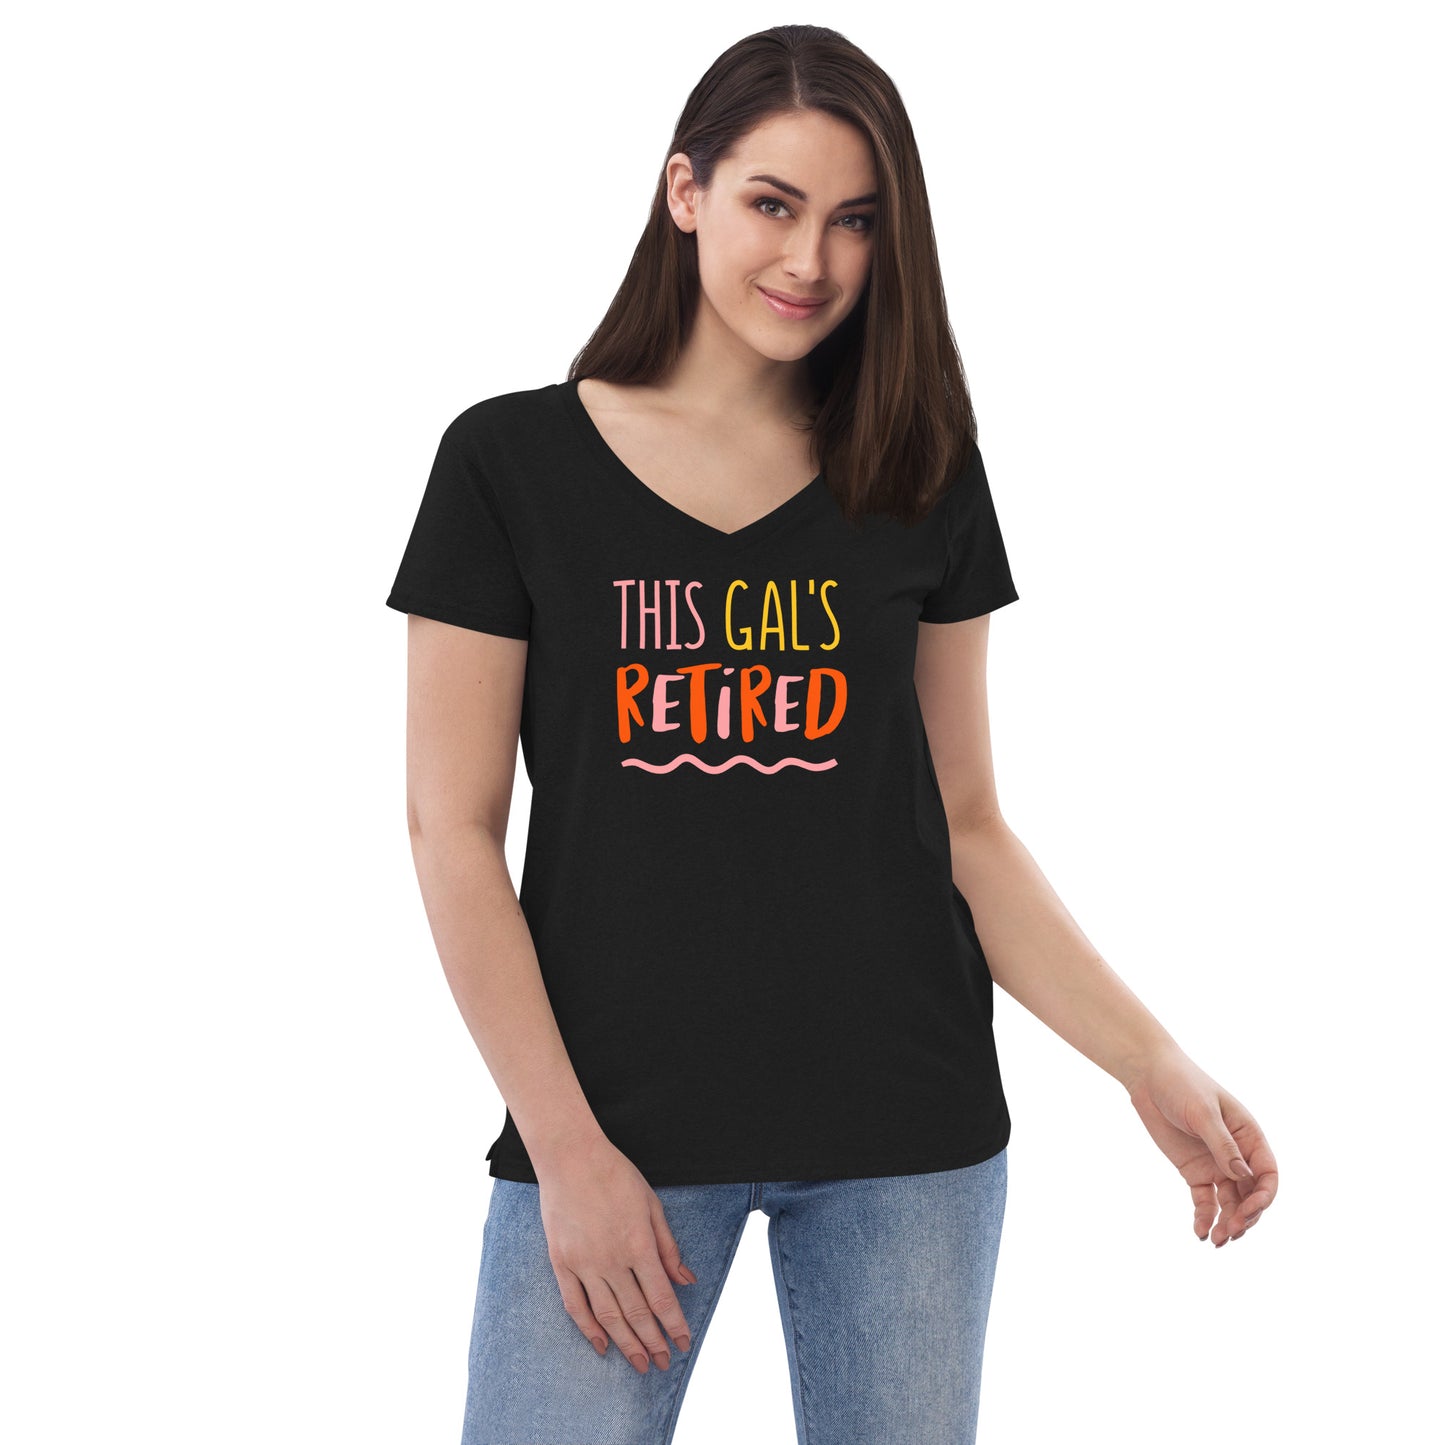 This Gal's Retired - Women’s Recycled V-Neck T-Shirt